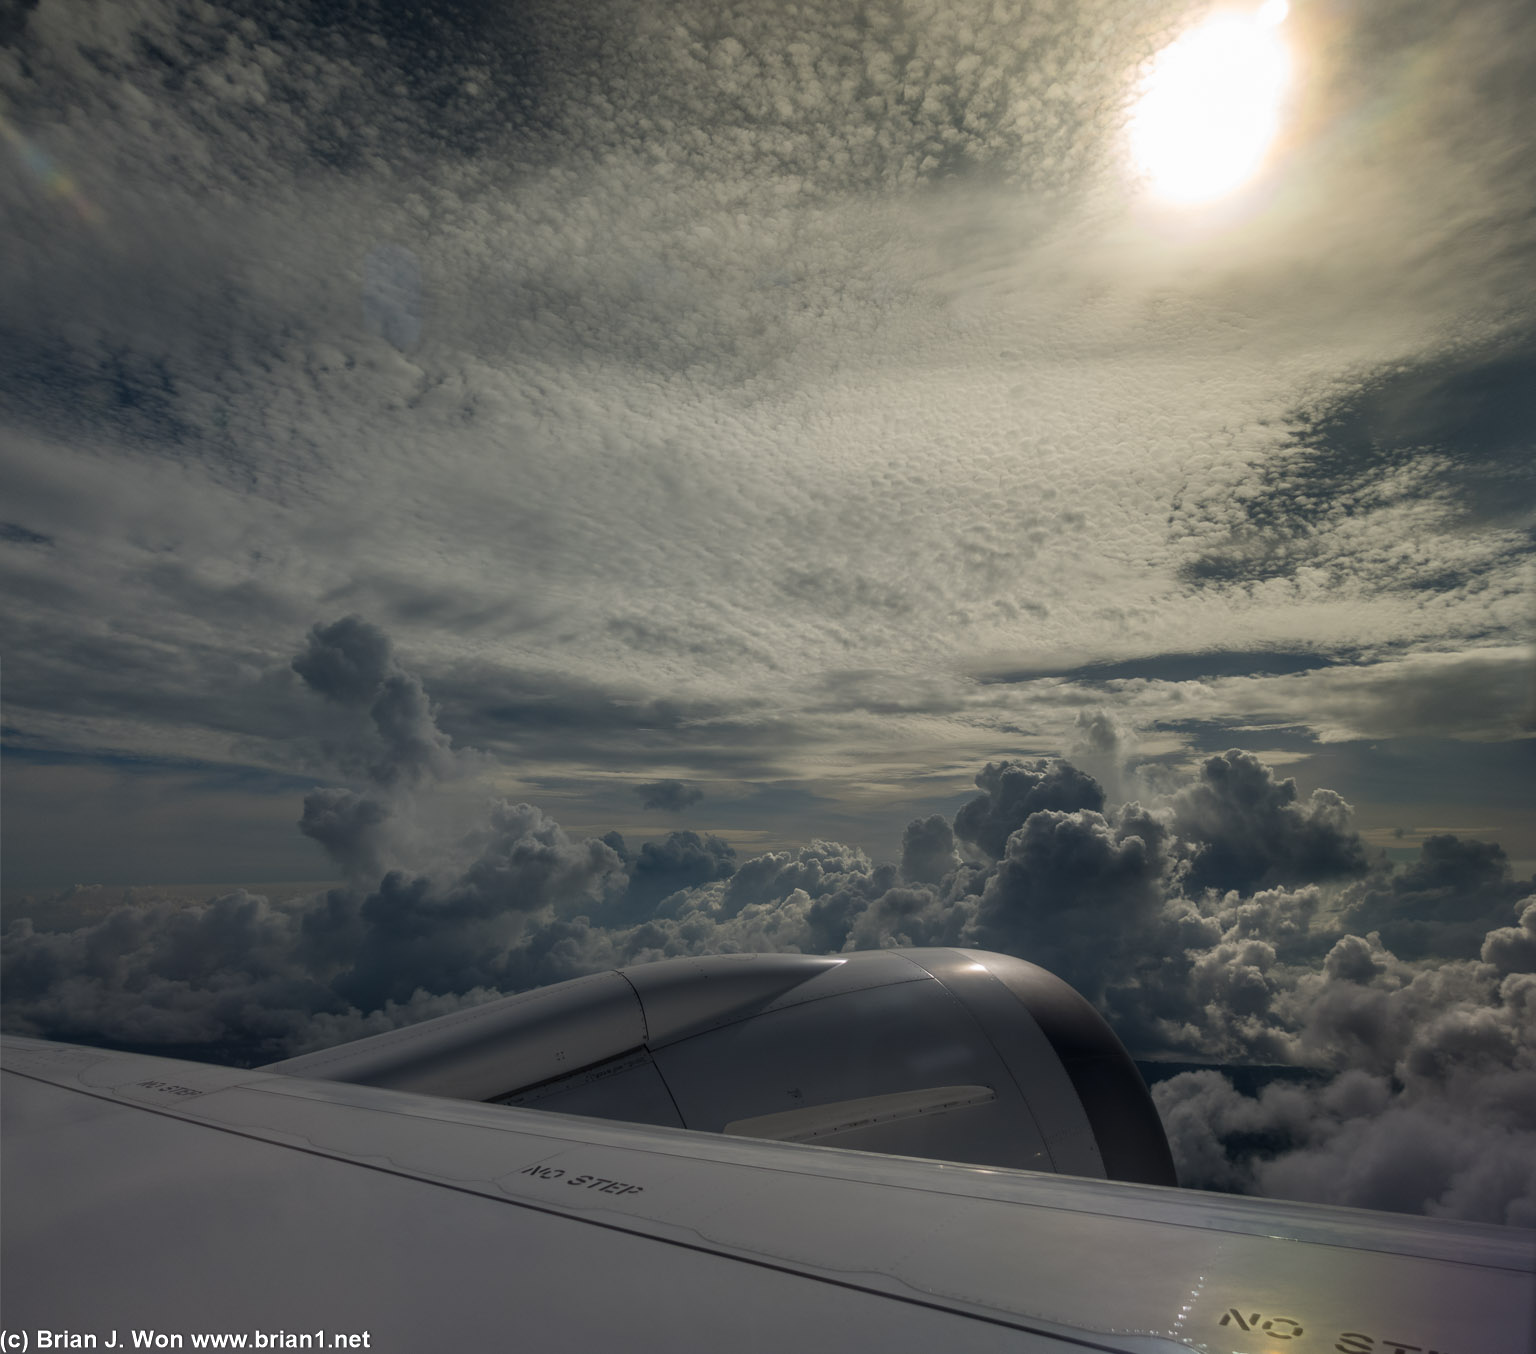 Towering clouds, yet the plane is climbing even higher.